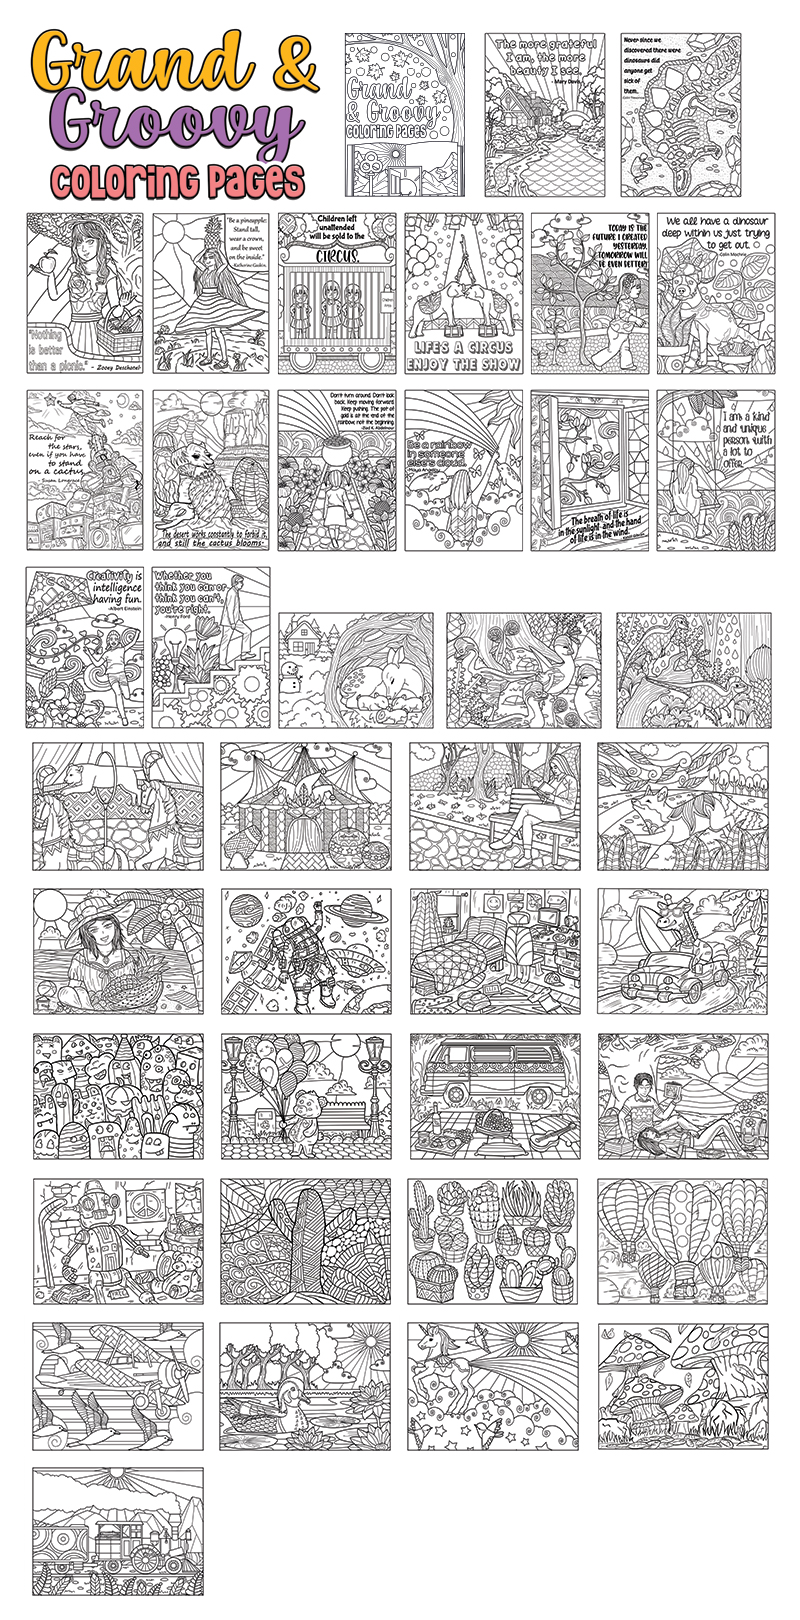 a complete image showing smaller images of all the coloring pages in a package about grand & groovy